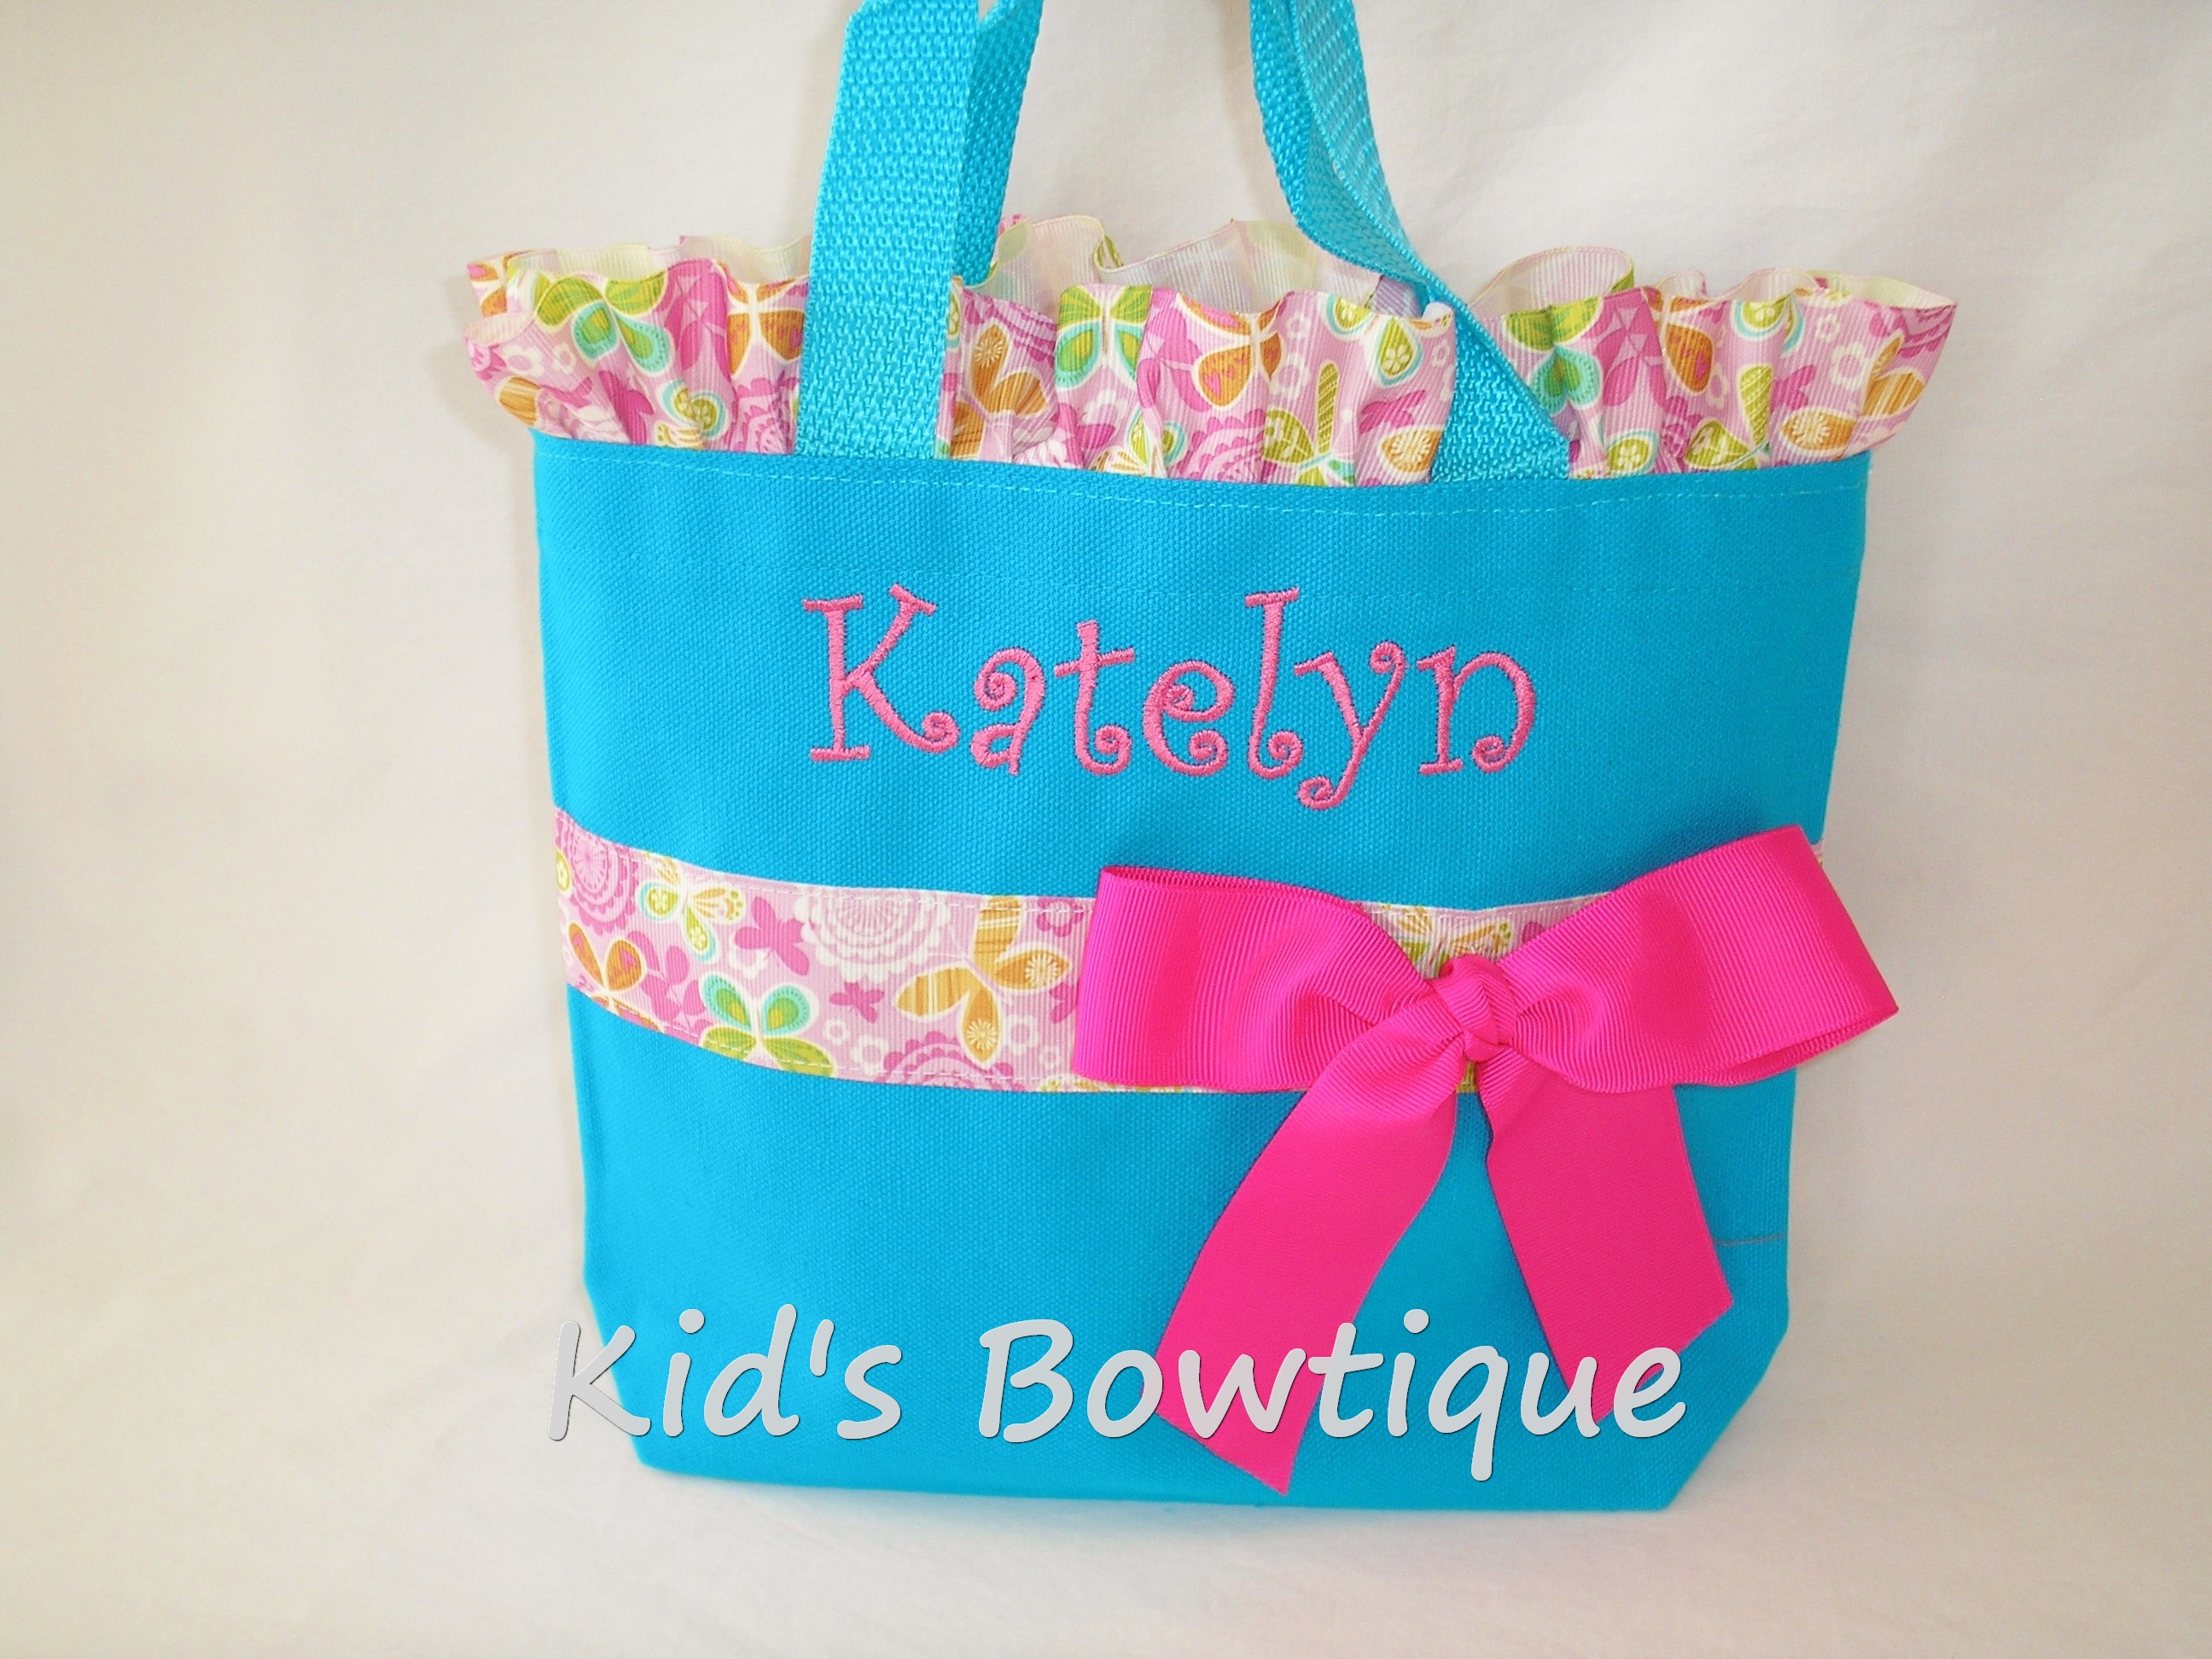 Ruffles and Bow Butterfly Ribbon Personalized Tote Bag